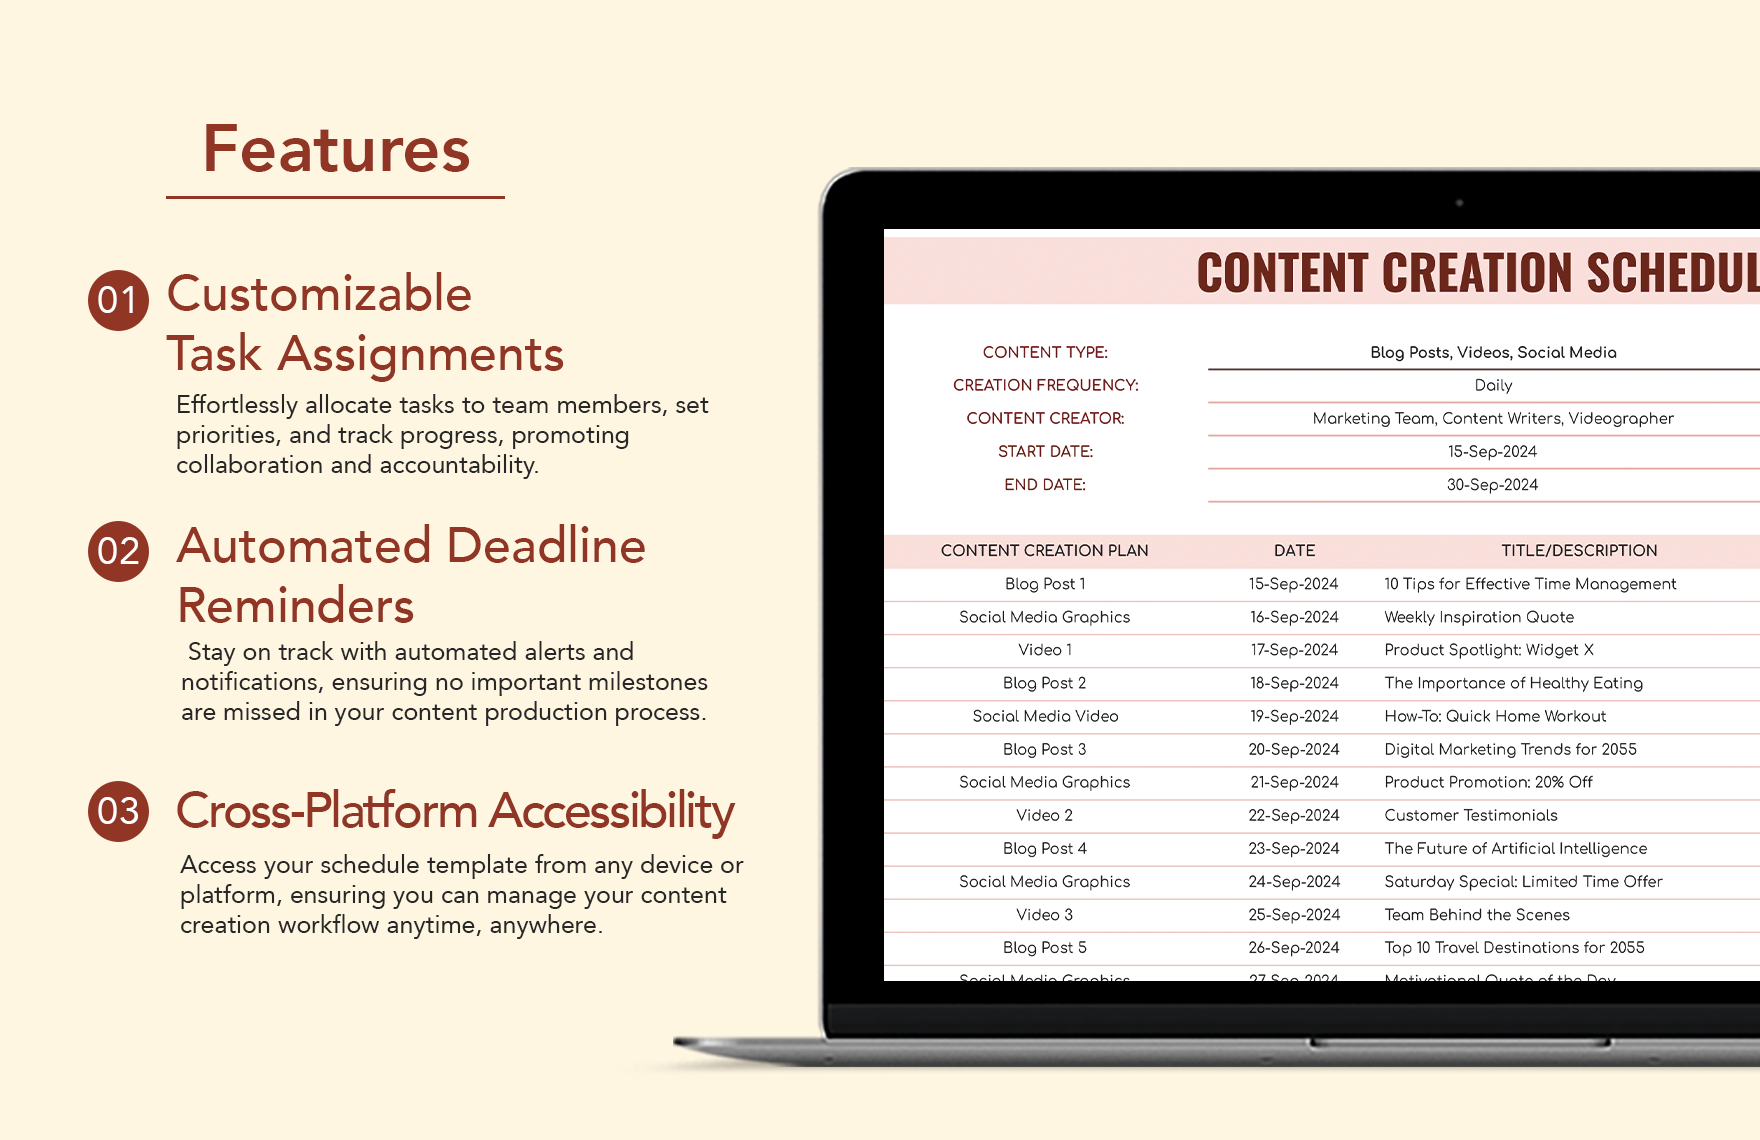 Content Creation Schedule Template